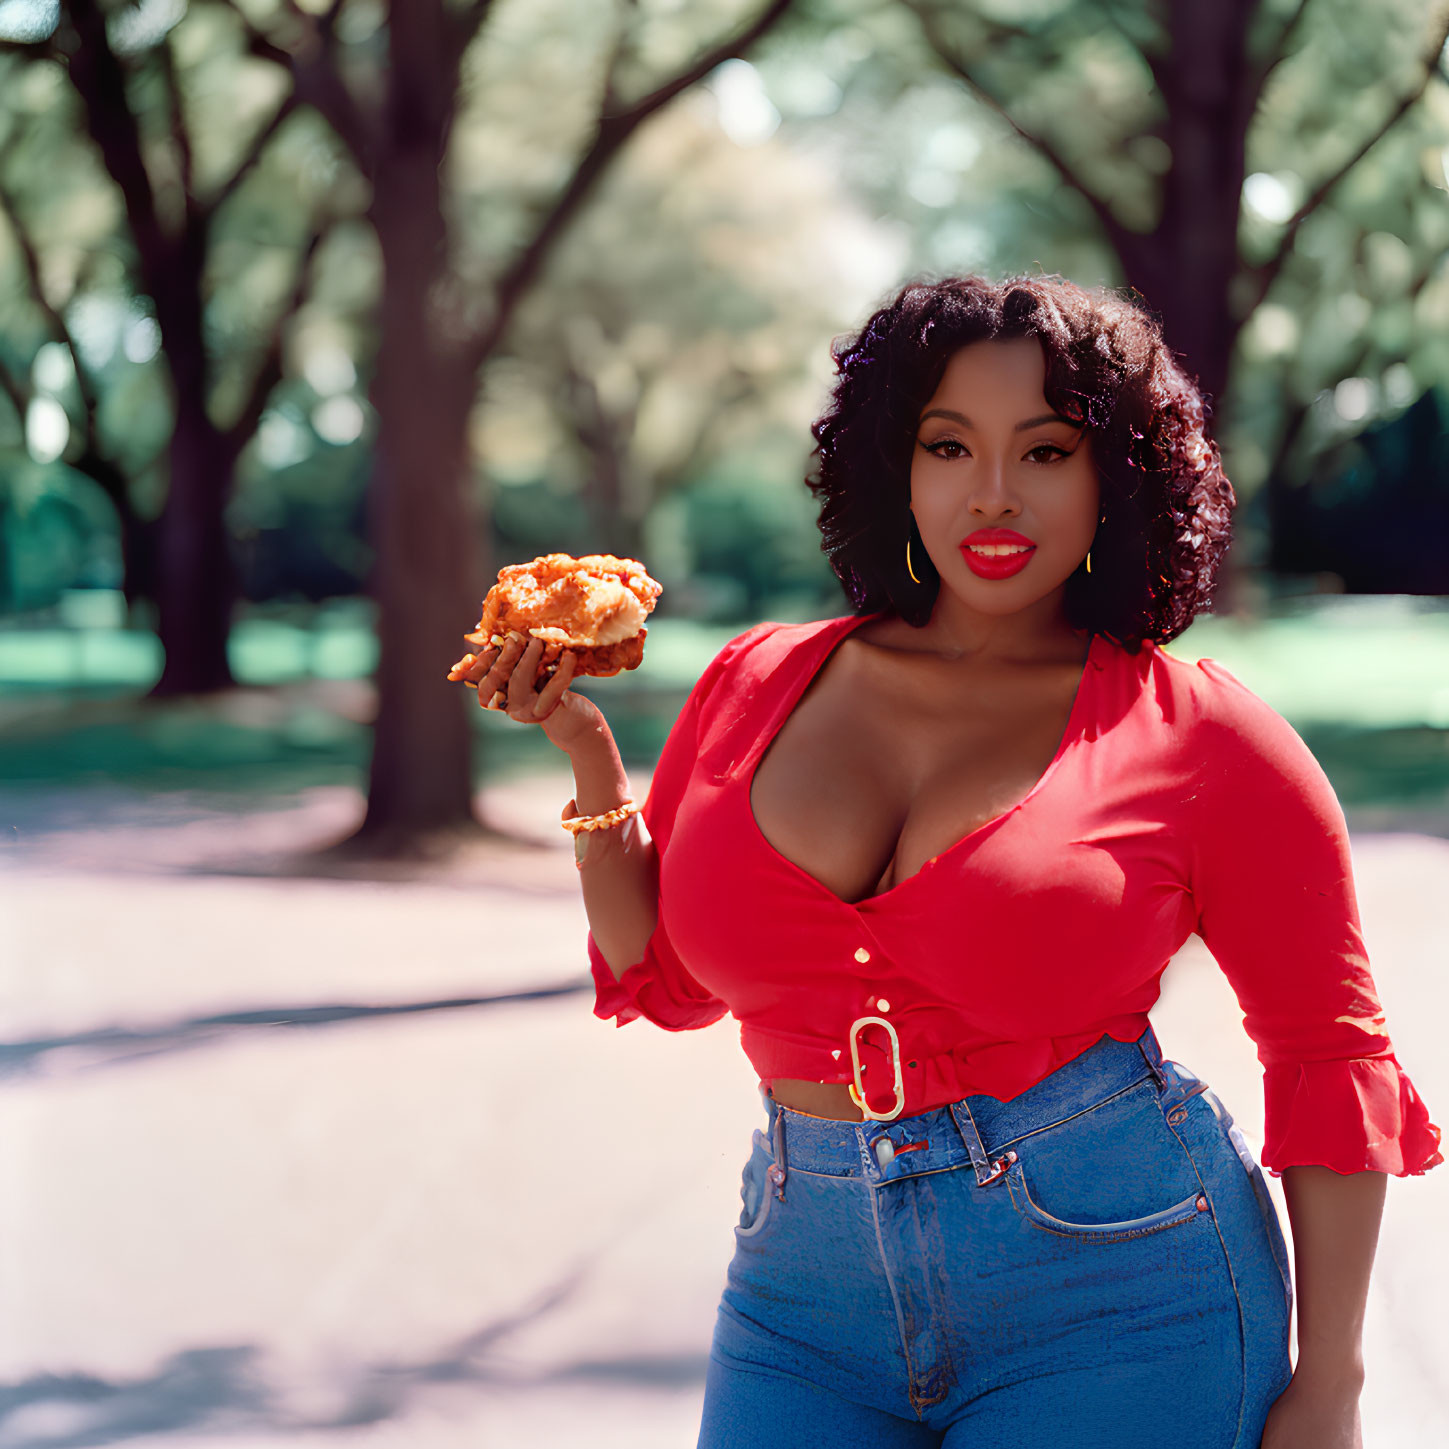 Woman in red top and blue jeans holding muffin in park with trees.